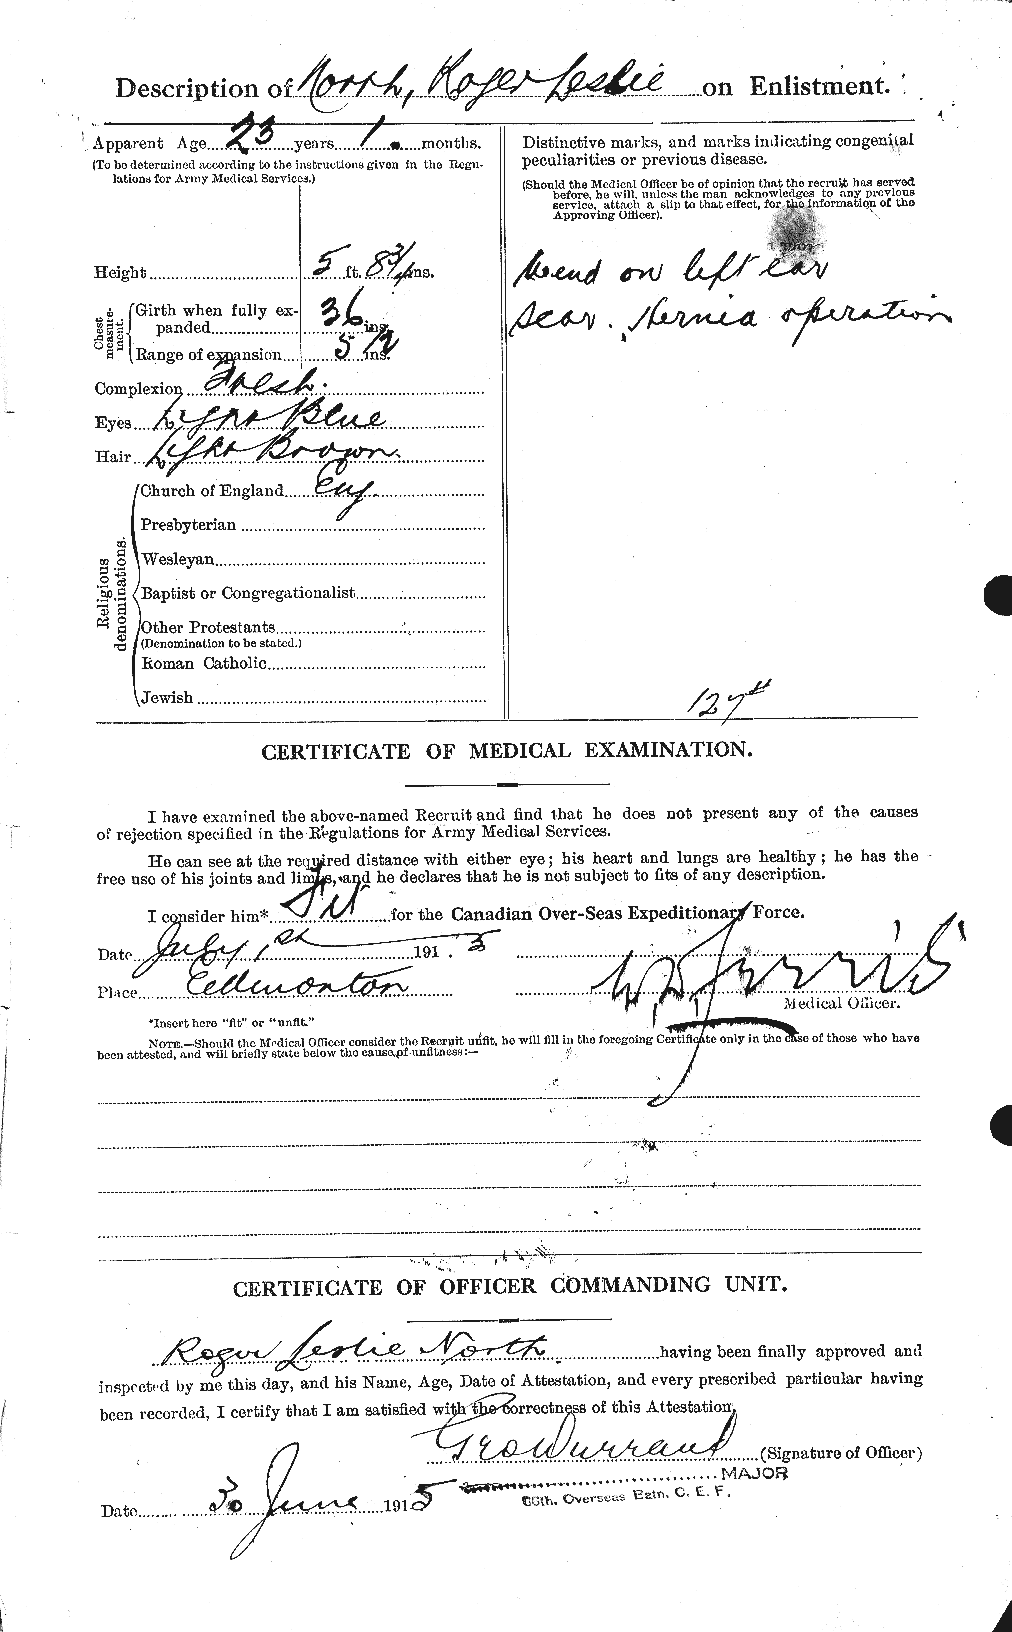 Personnel Records of the First World War - CEF 549928b